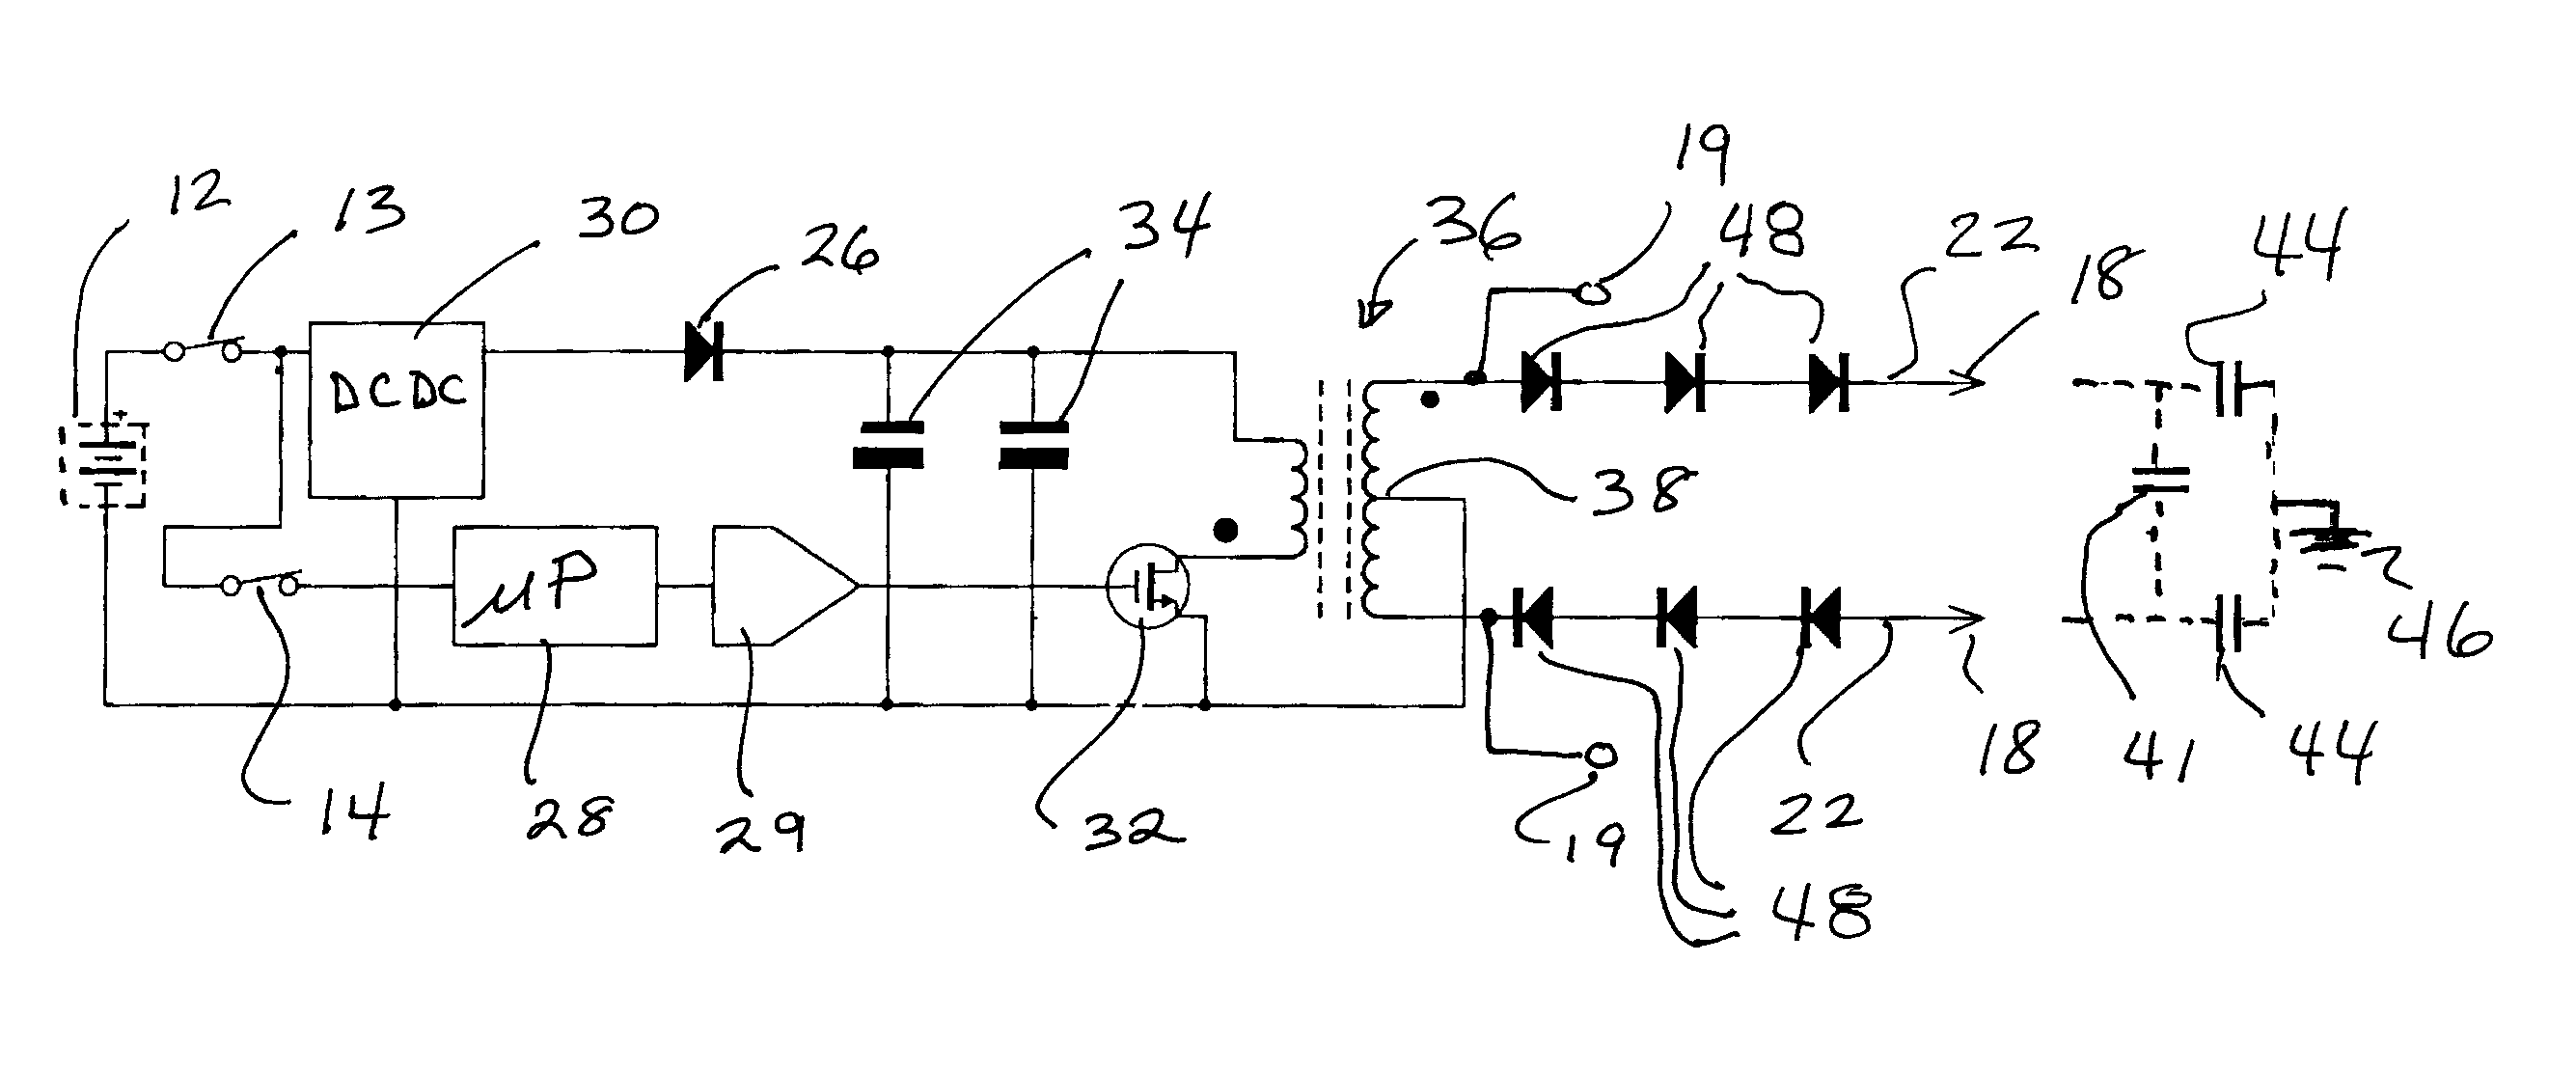 Electric disabling device with controlled immobilizing pulse widths